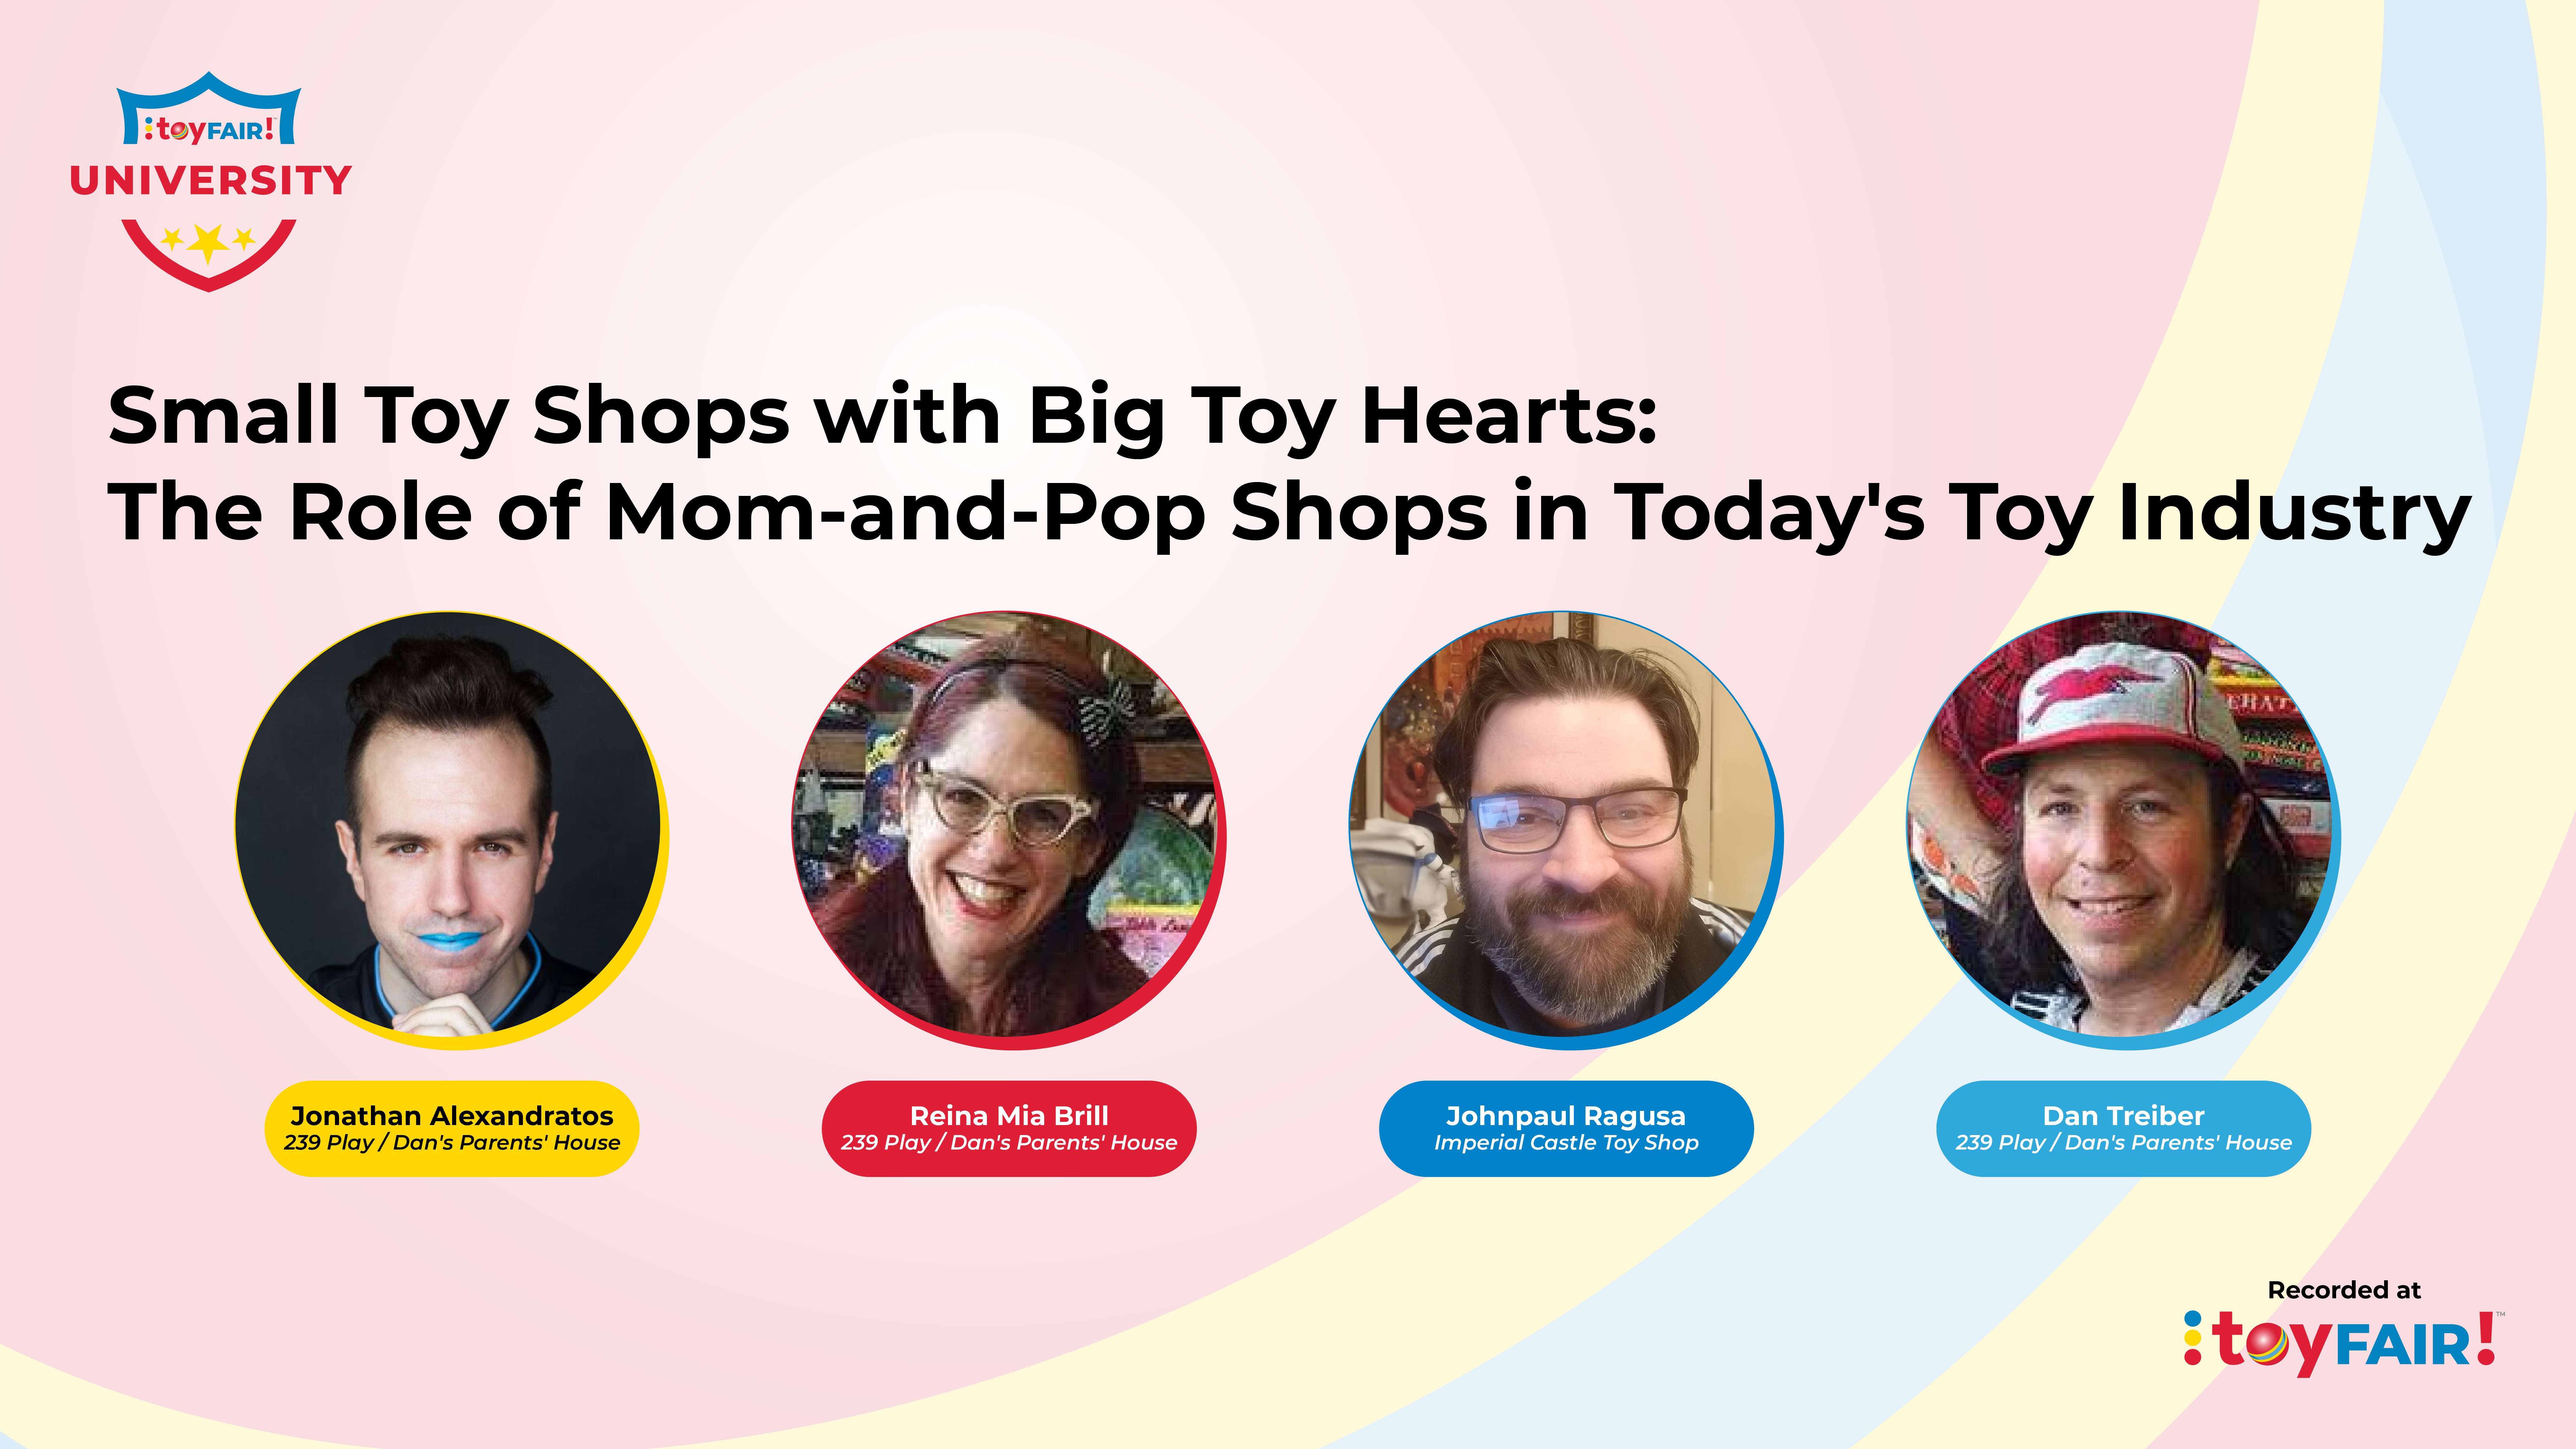 Small Toy Shops with Big Toy Hearts: The Role of Mom-and-Pop Shops in Today's Toy Industry